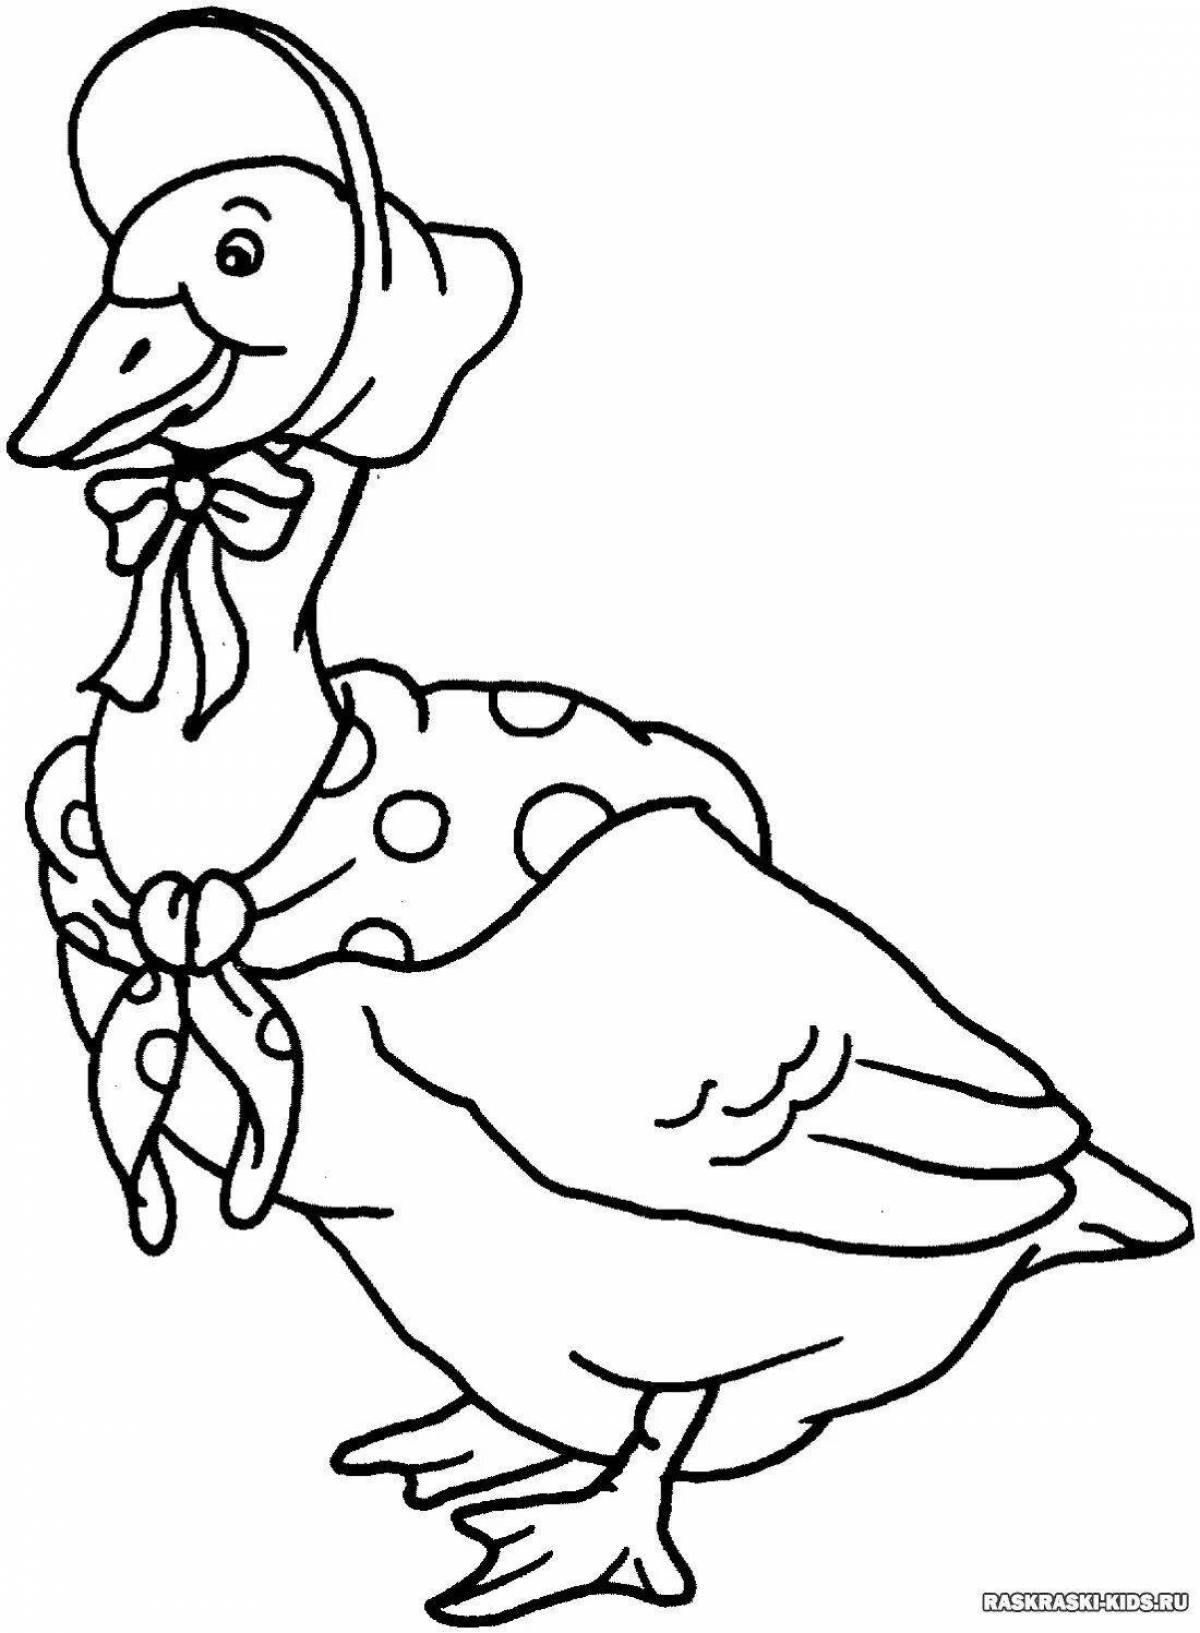 Fancy geese coloring pages for girls